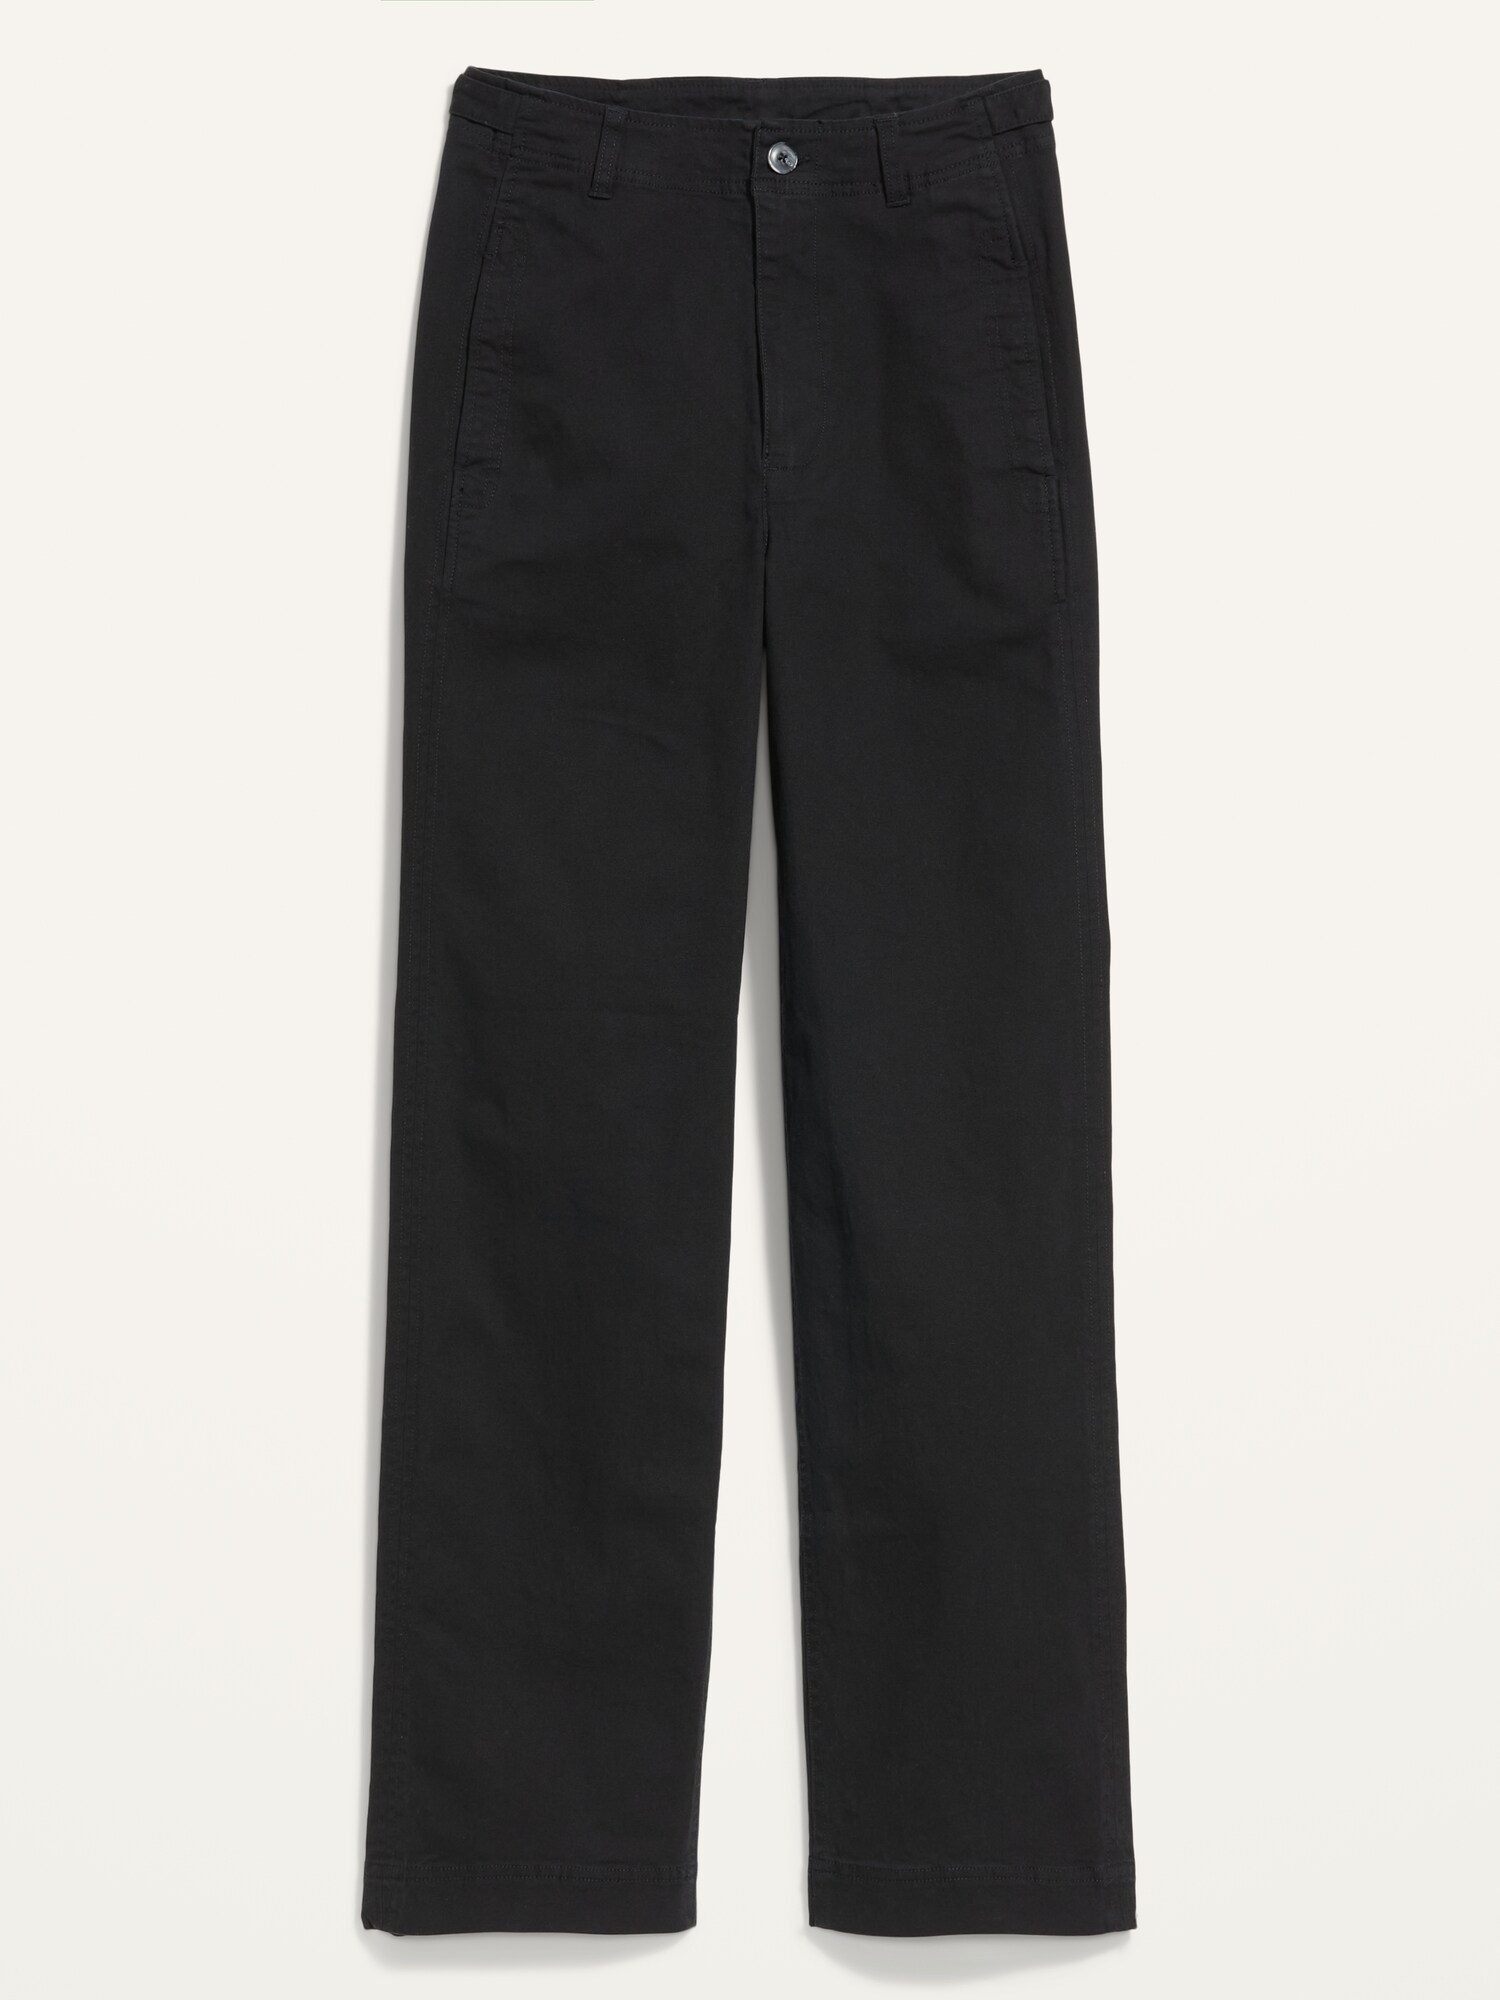 High-Waisted Canvas Wide-Leg Workwear Pants for Women, Old Navy